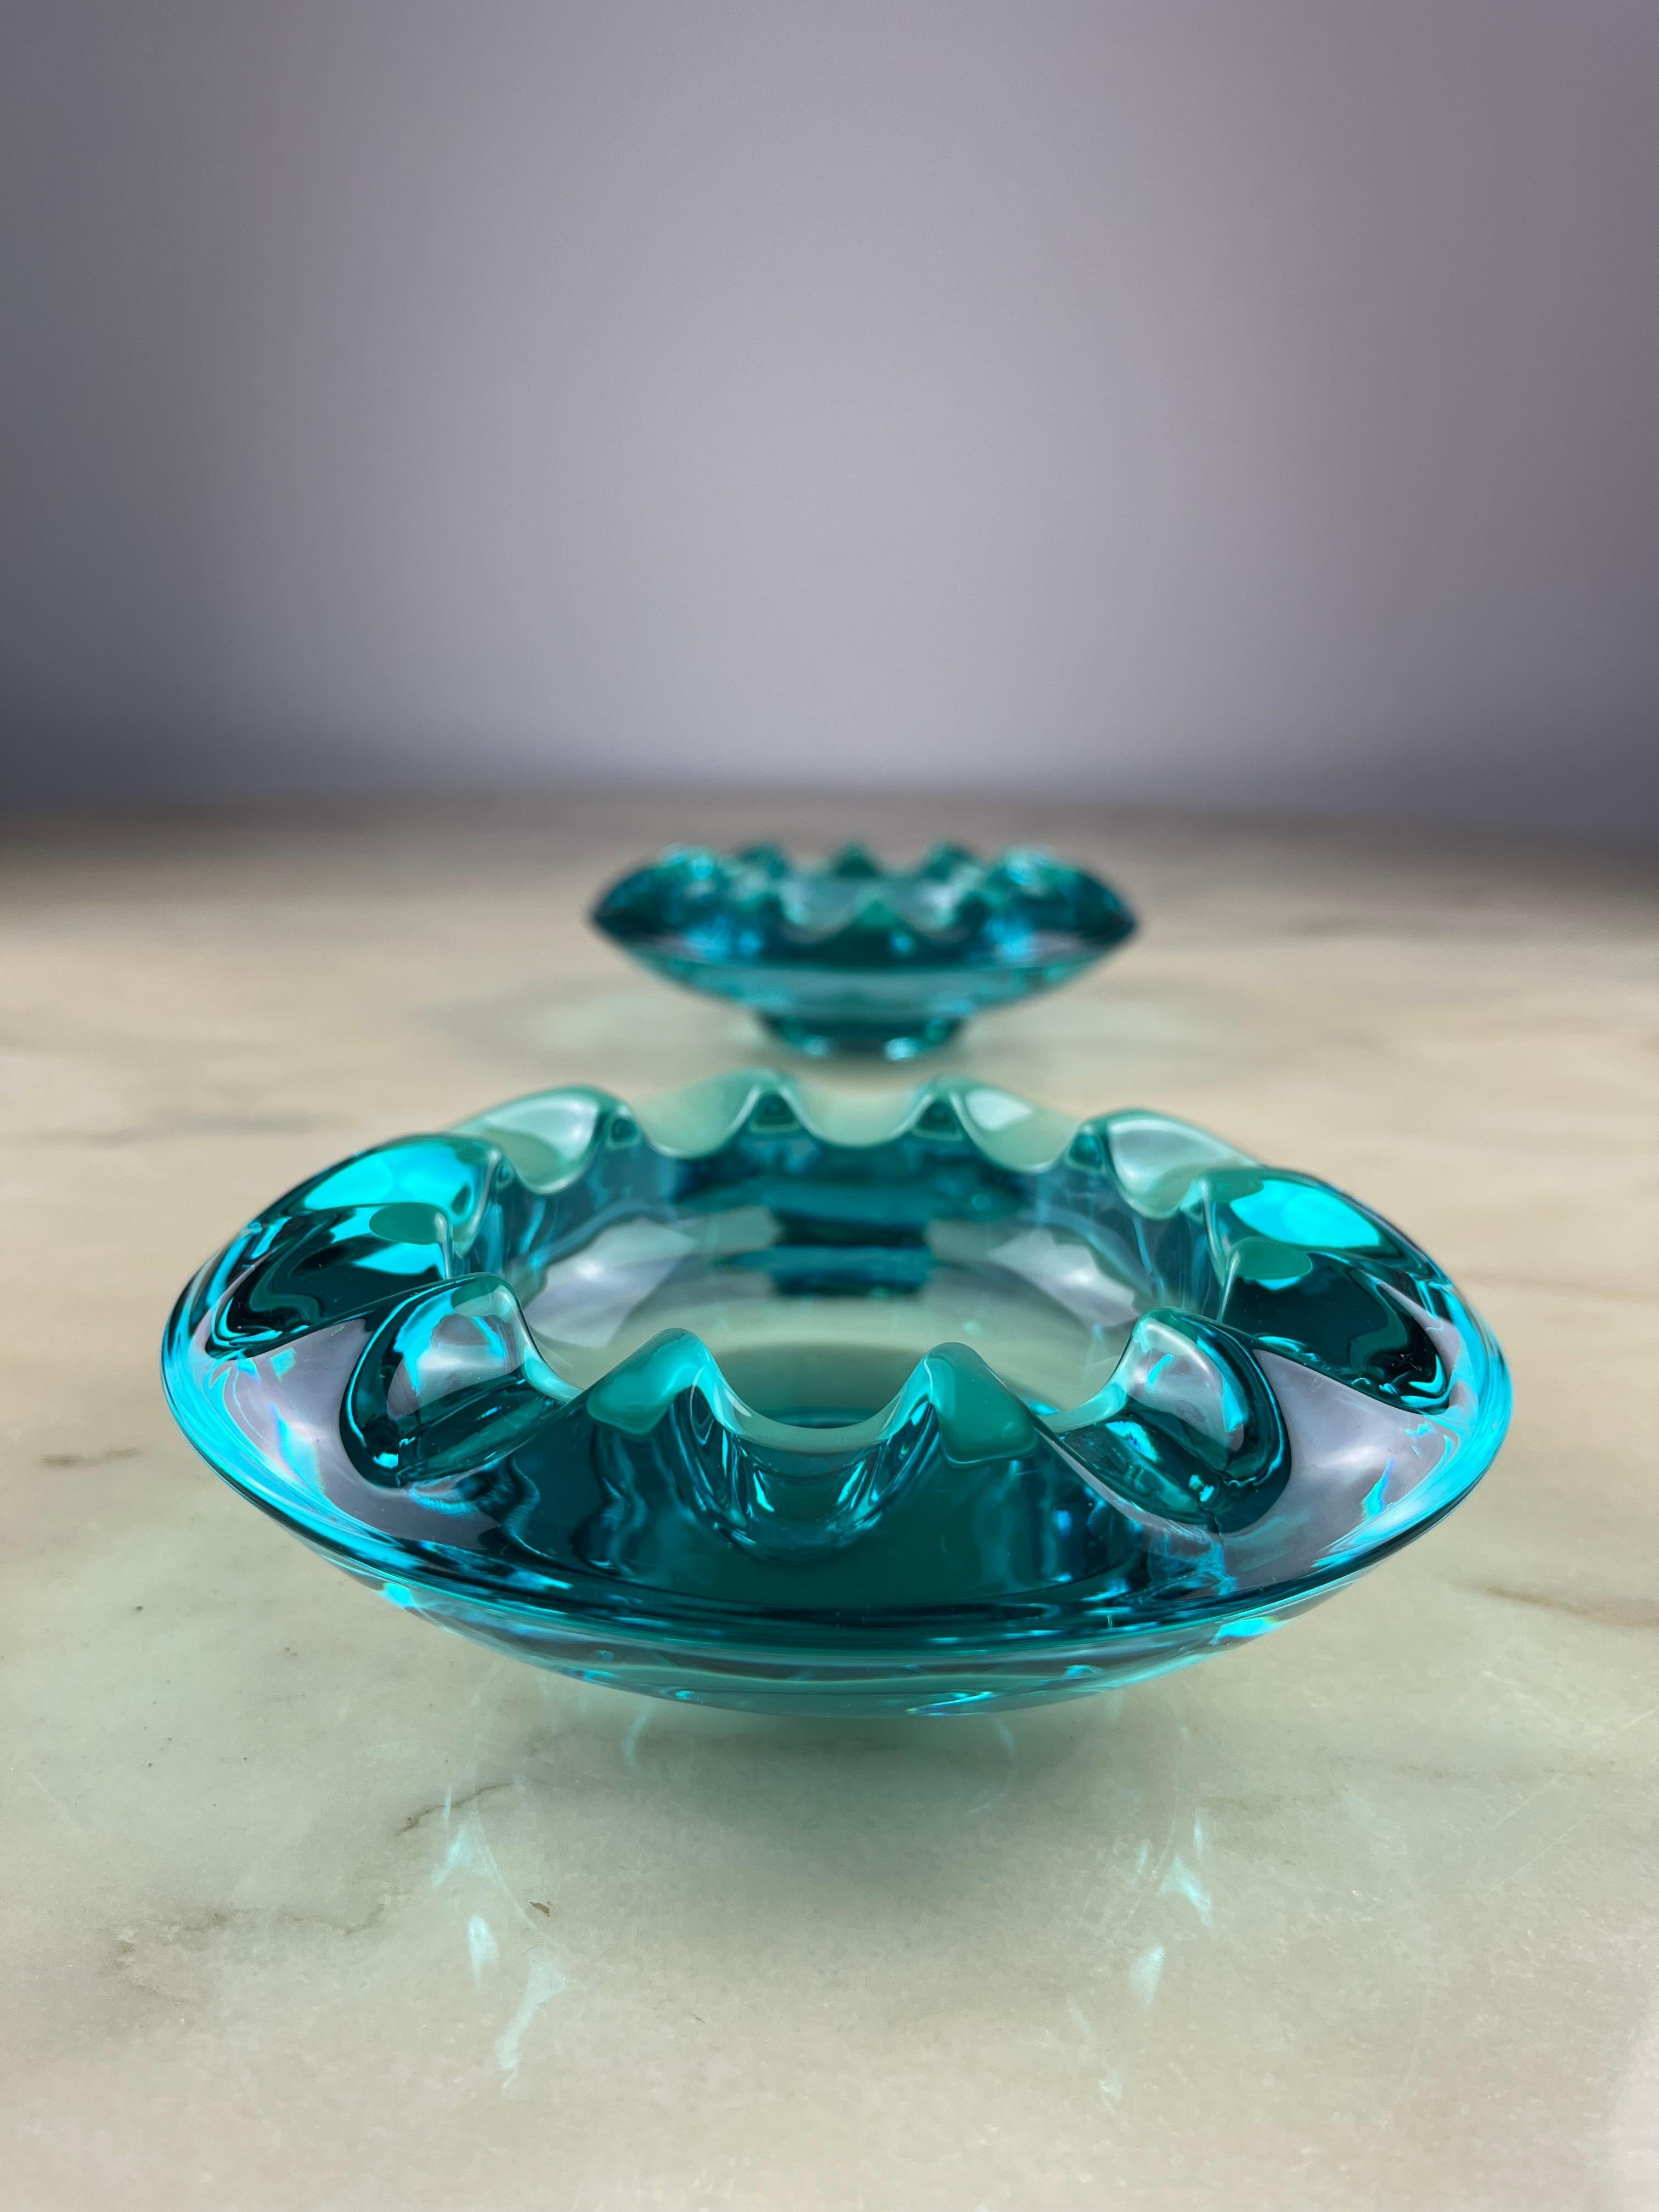 Murano glass ashtrays / valet trays, Italy, 1970. Delicious examples of the high craftsmanship of the Murano masters. Purchased by my family in the early 70s and preserved in an excellent manner. Only small scratches, almost invisible, signs of the